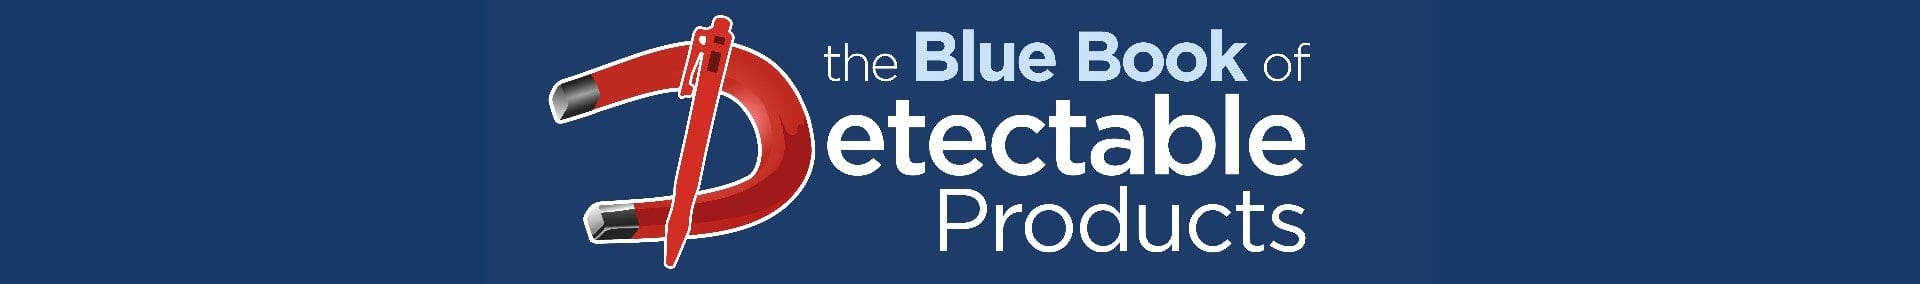 The Blue Book of Essential Detectable Products - Detectamet Product Catalog